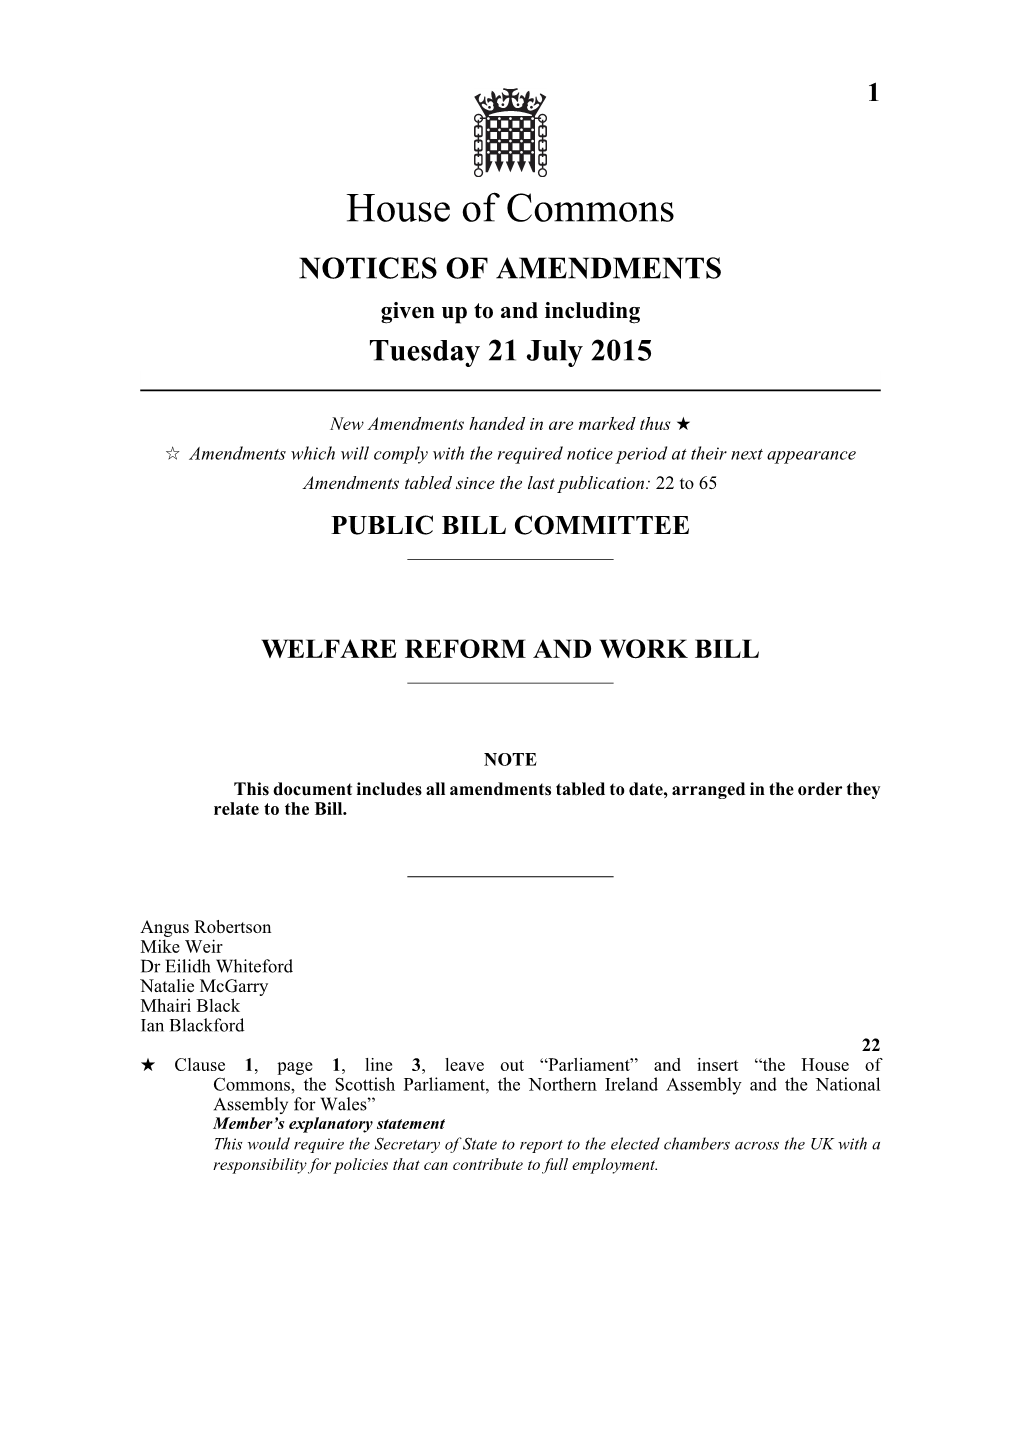 Notice of Amendments As of 21 July 2015